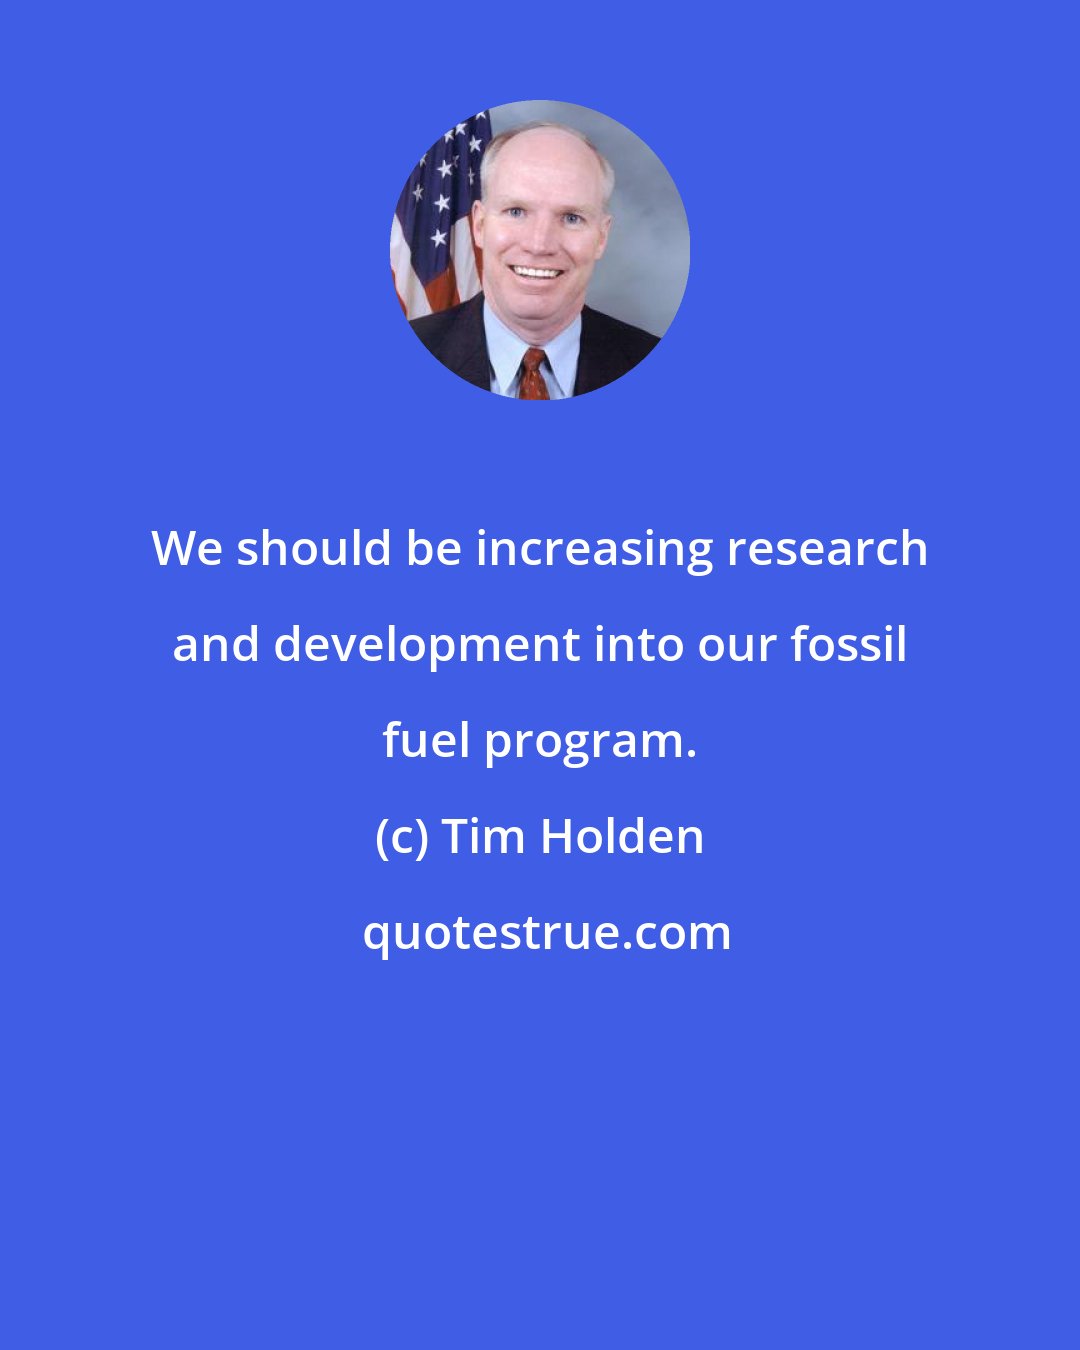 Tim Holden: We should be increasing research and development into our fossil fuel program.